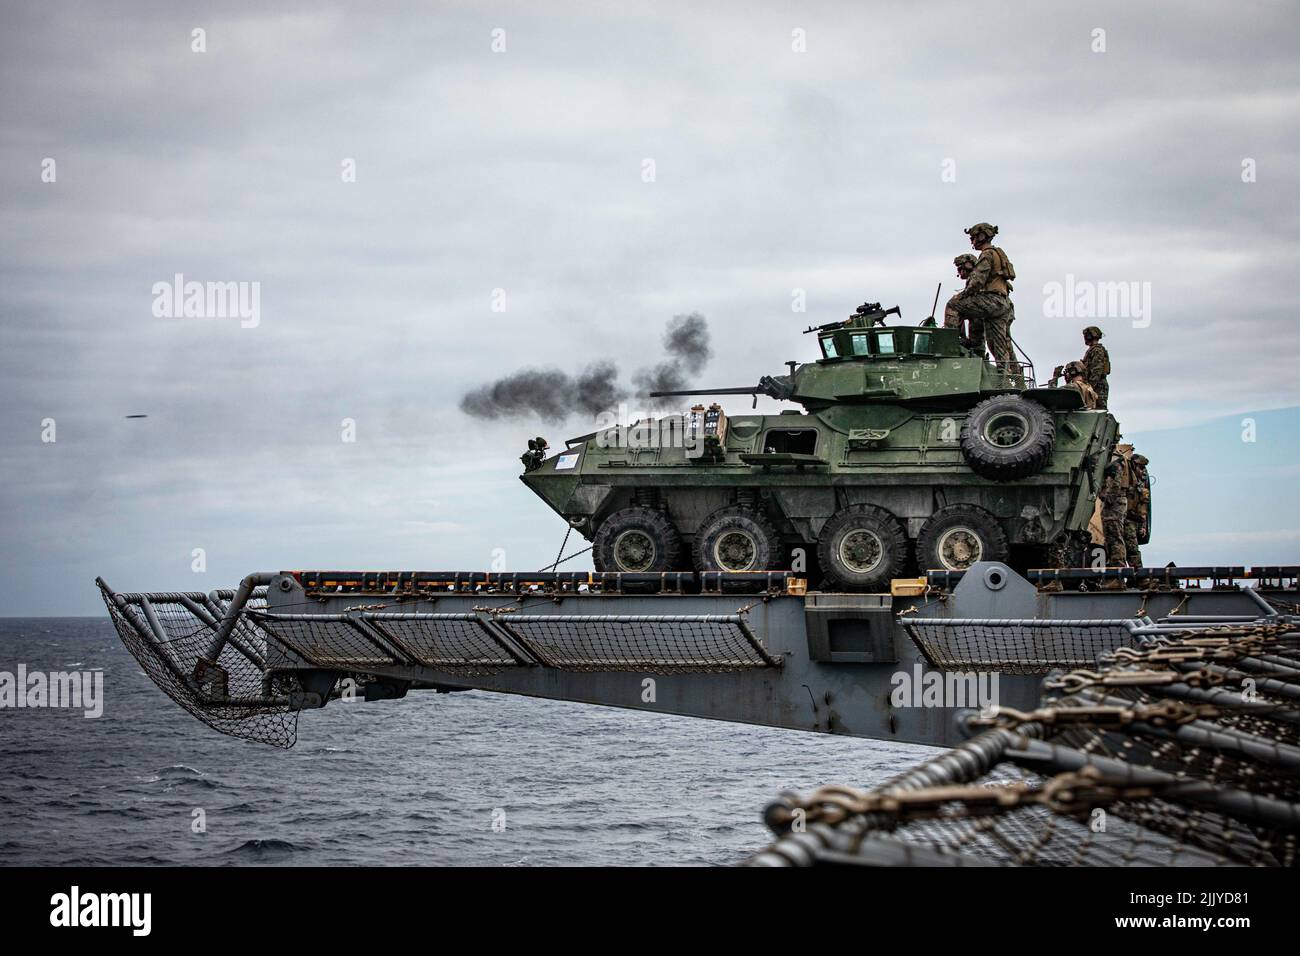 June 28, 2022 - At Sea - A U.S. Marine Corps light armored vehicle (LAV) A2-25 with Bravo Company, Ground Combat Element, 22nd Marine Expeditionary Unit (MEU), fires at targets during a live-fire exercise aboard the Wasp-class amphibious assault ship USS Kearsarge (LHD 3) in the Atlantic Ocean, June 28, 2022. The Kearsarge Amphibious Ready Group and embarked 22nd MEU, under the command and control of Task Force 61/2, is on a scheduled deployment in the U.S. Naval Forces Europe area of operations, employed by U.S. Sixth Fleet to defend U.S., allied and partner interests. (Credit Image: © U.S. M Stock Photo